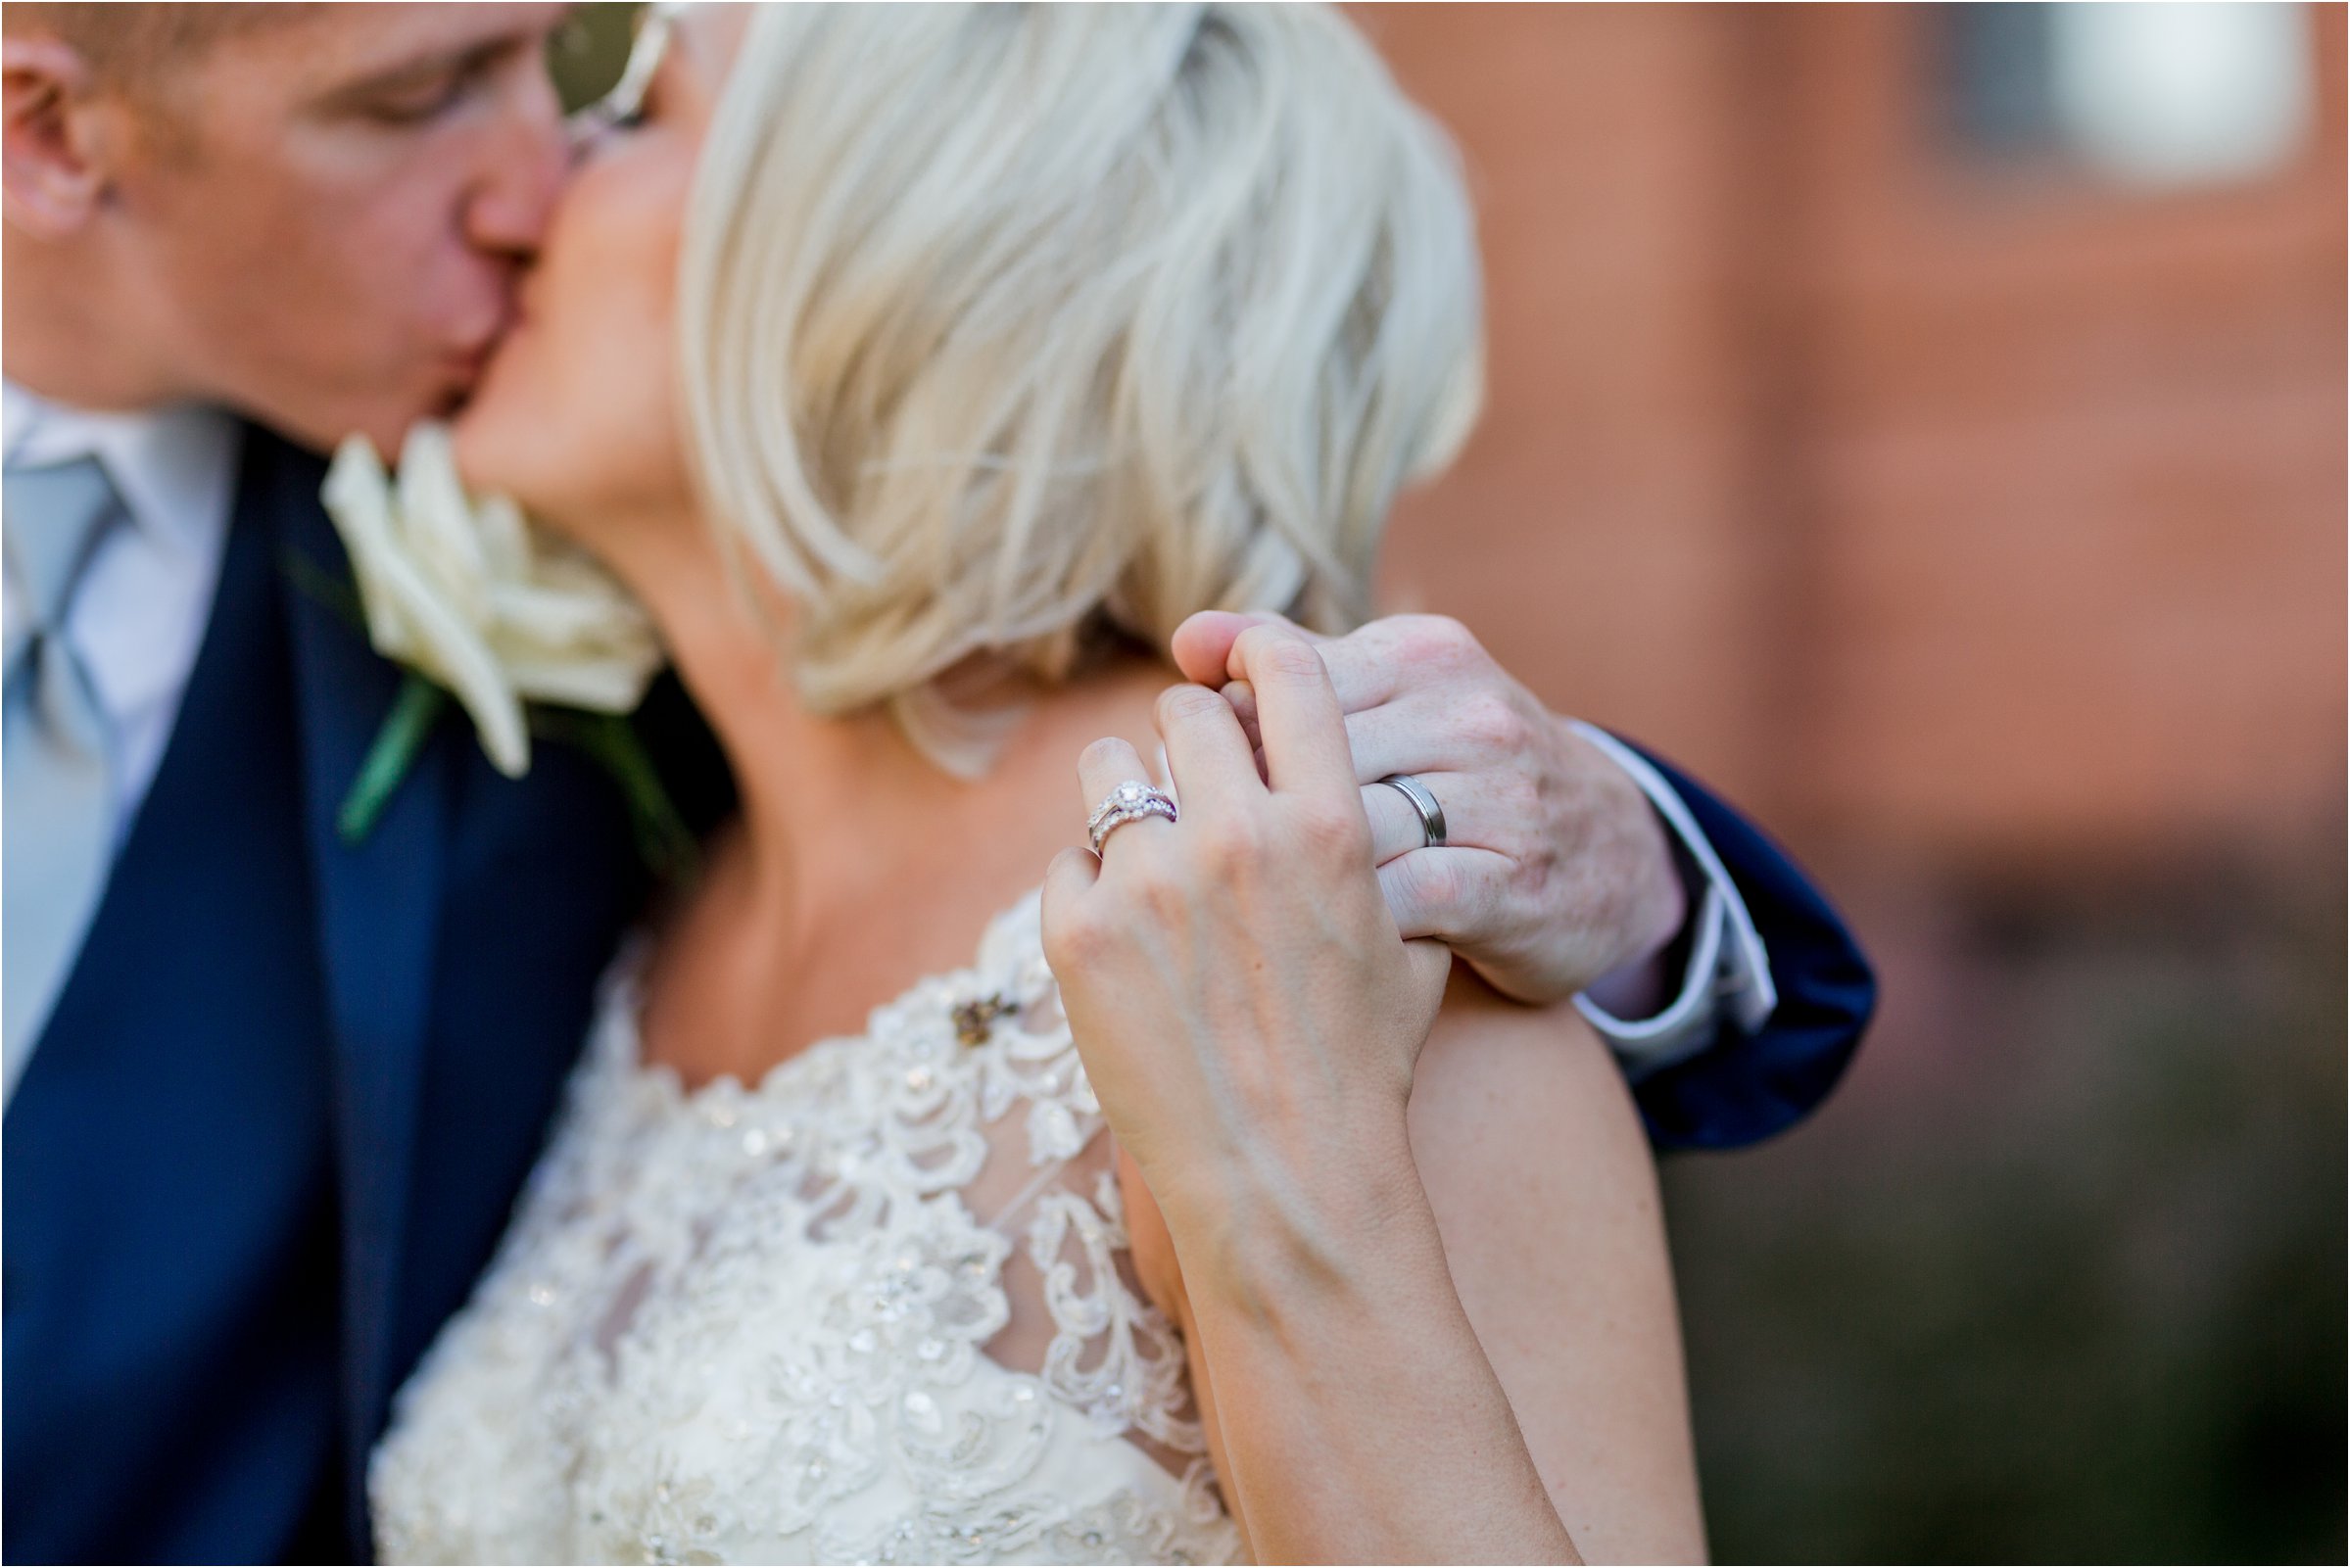 bride and groom kiss with wedding rings in foreground